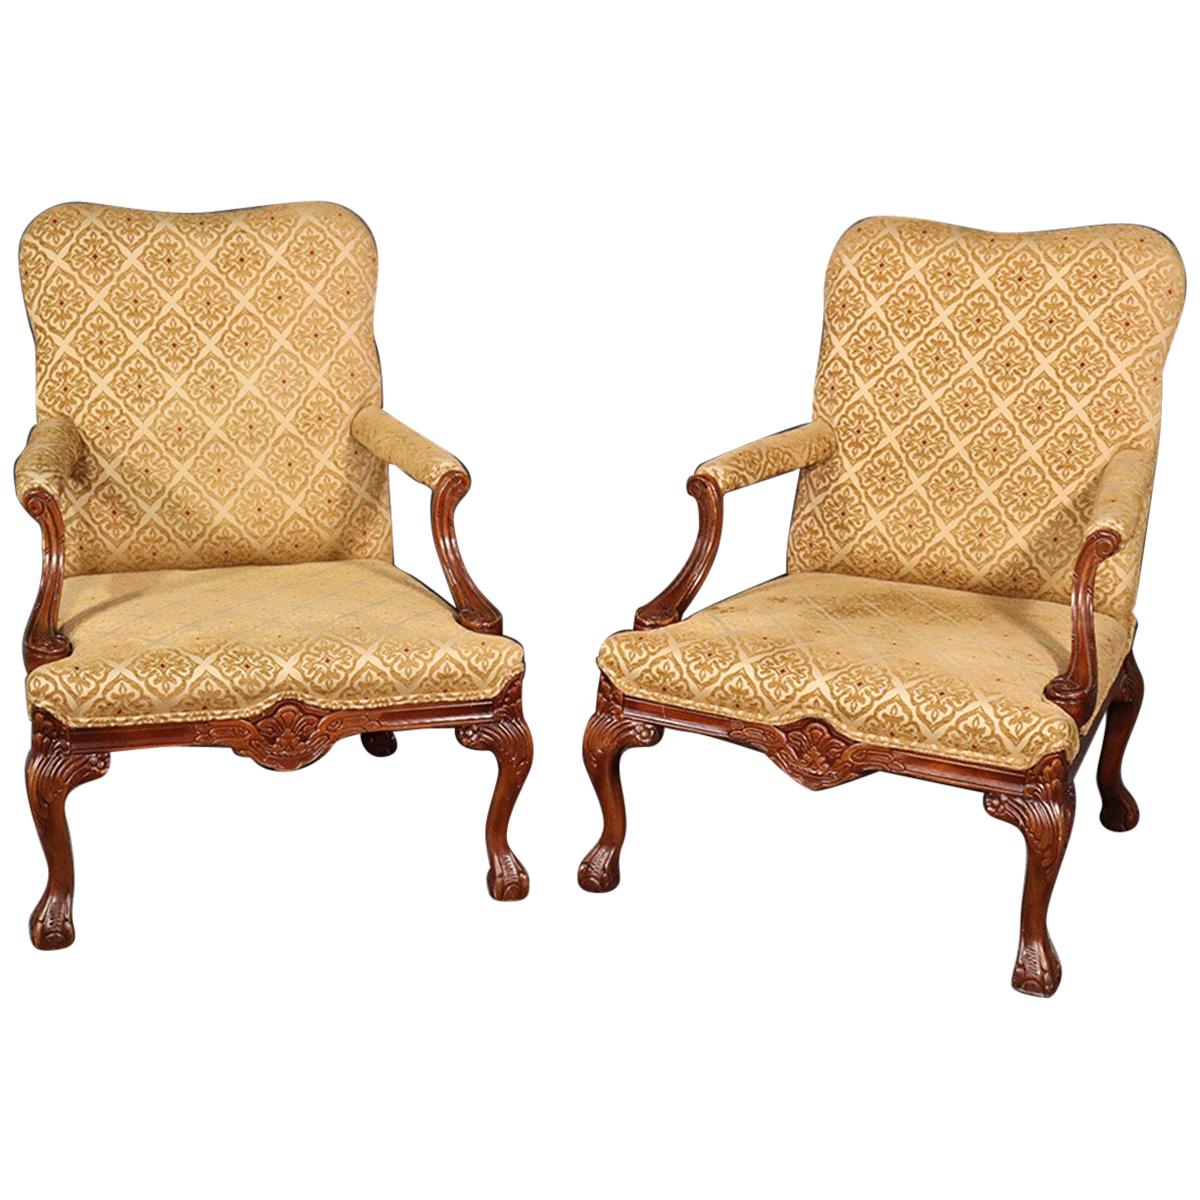 Pair of English Carved Walnut Georgian Style Lounge Arm Parlor Chairs